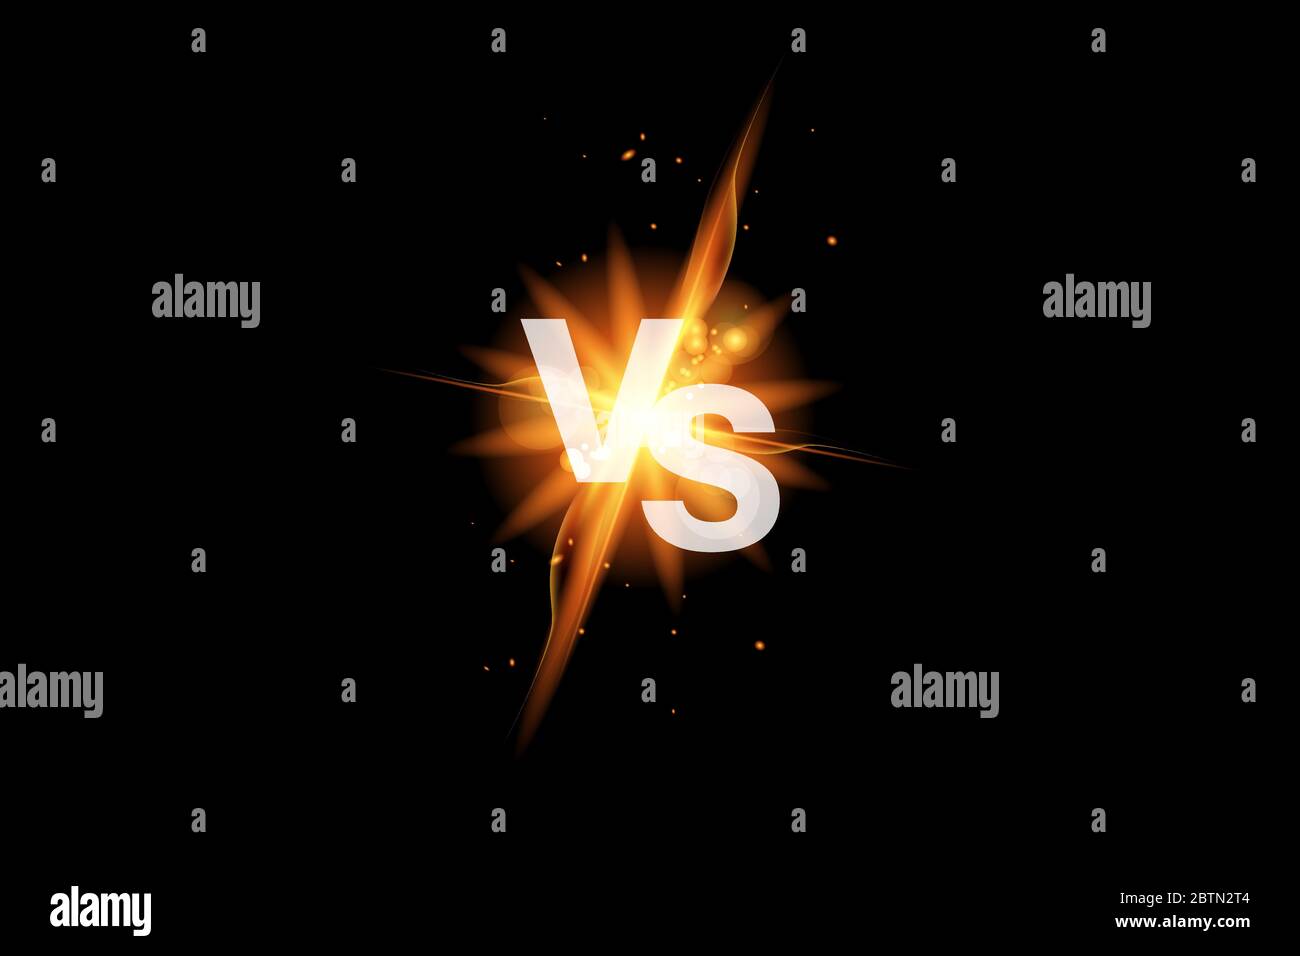 Vs versus battle sport background. Versus fight icon with fire. Vs duel icon. Vector illustration Stock Vector